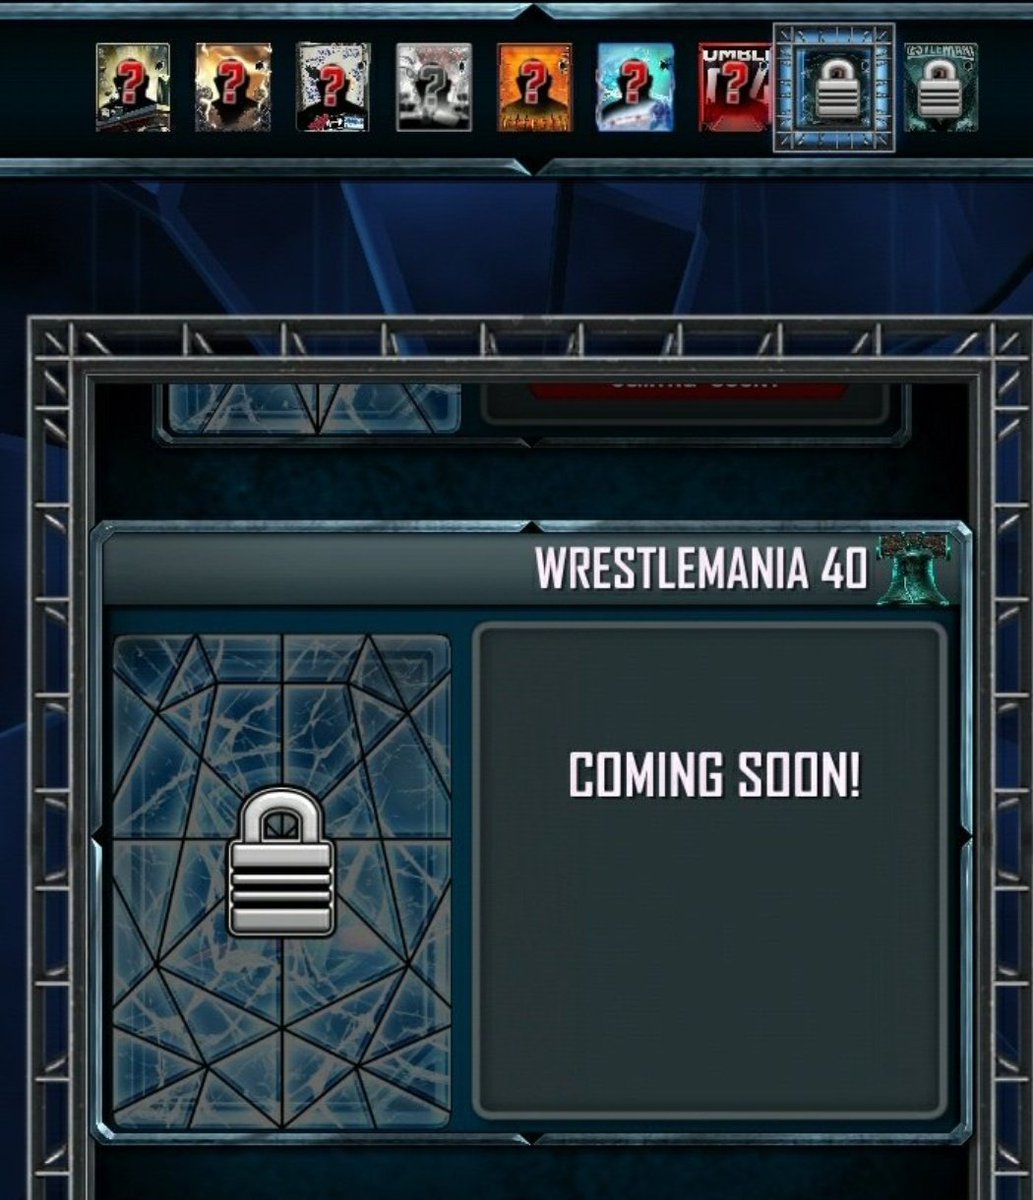 Just when I had hopes for #WWESuperCard they go and revert the change so we have to start on the card we used to start on. Massive L. Again. @WWESuperCard